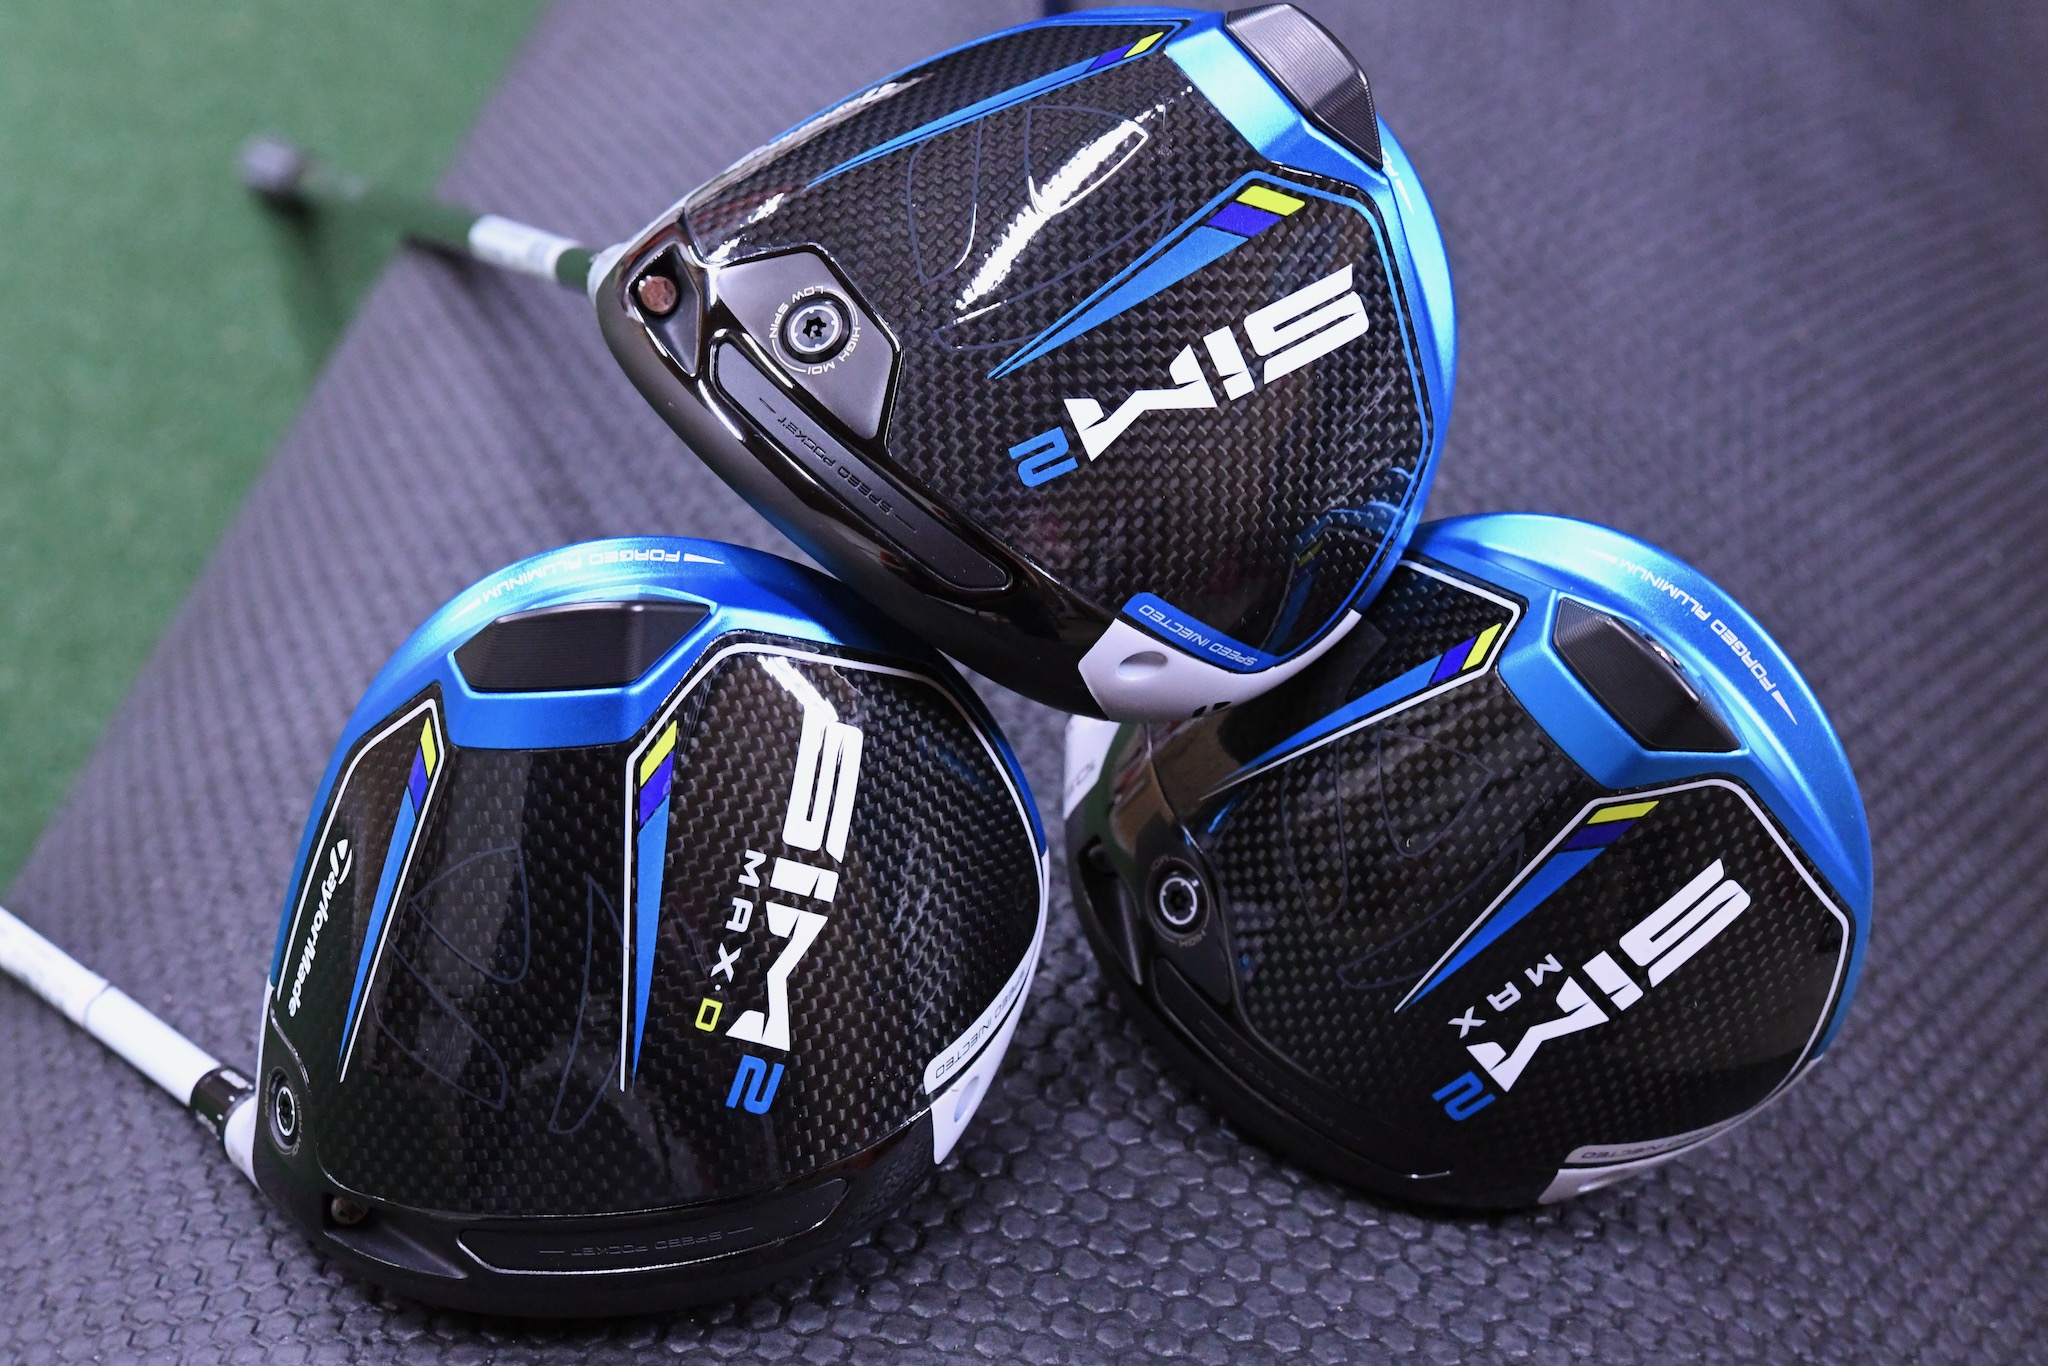 2021 TaylorMade SIM2 drivers: Better performance, piece by piece